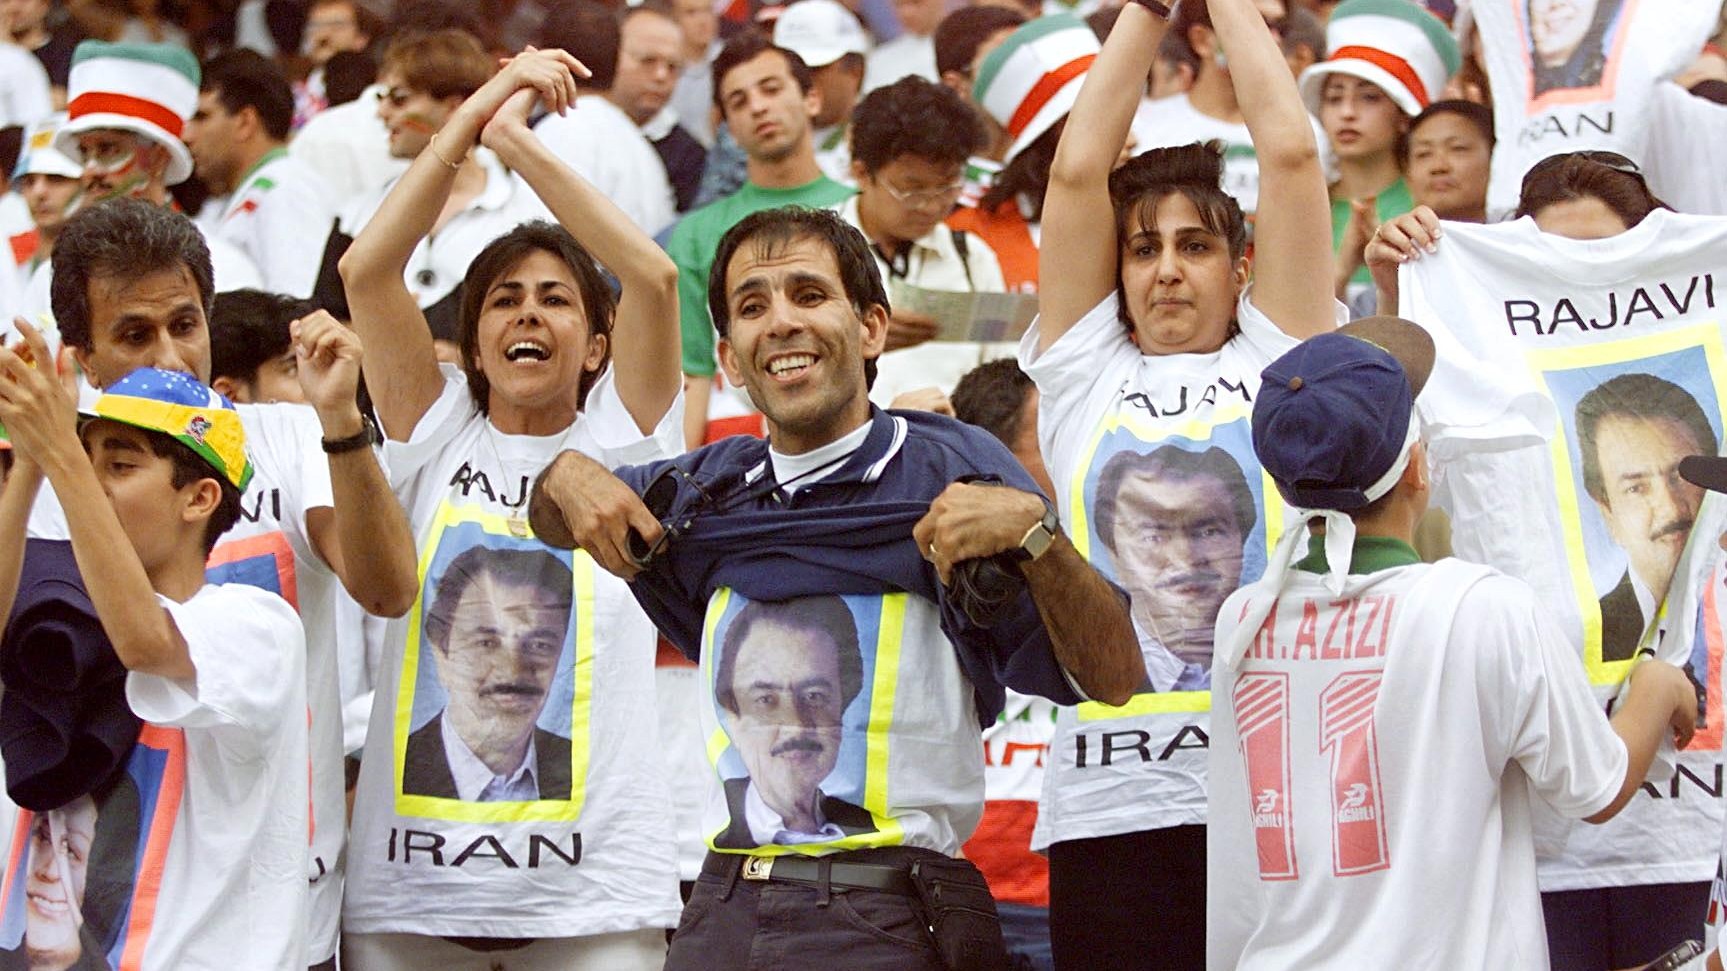 Supporters display portraits of the leader of the Mujahedin-e-Khalq (MeK) organisation at the match between Iran and the United States on 21 June, 1998 (AFP)